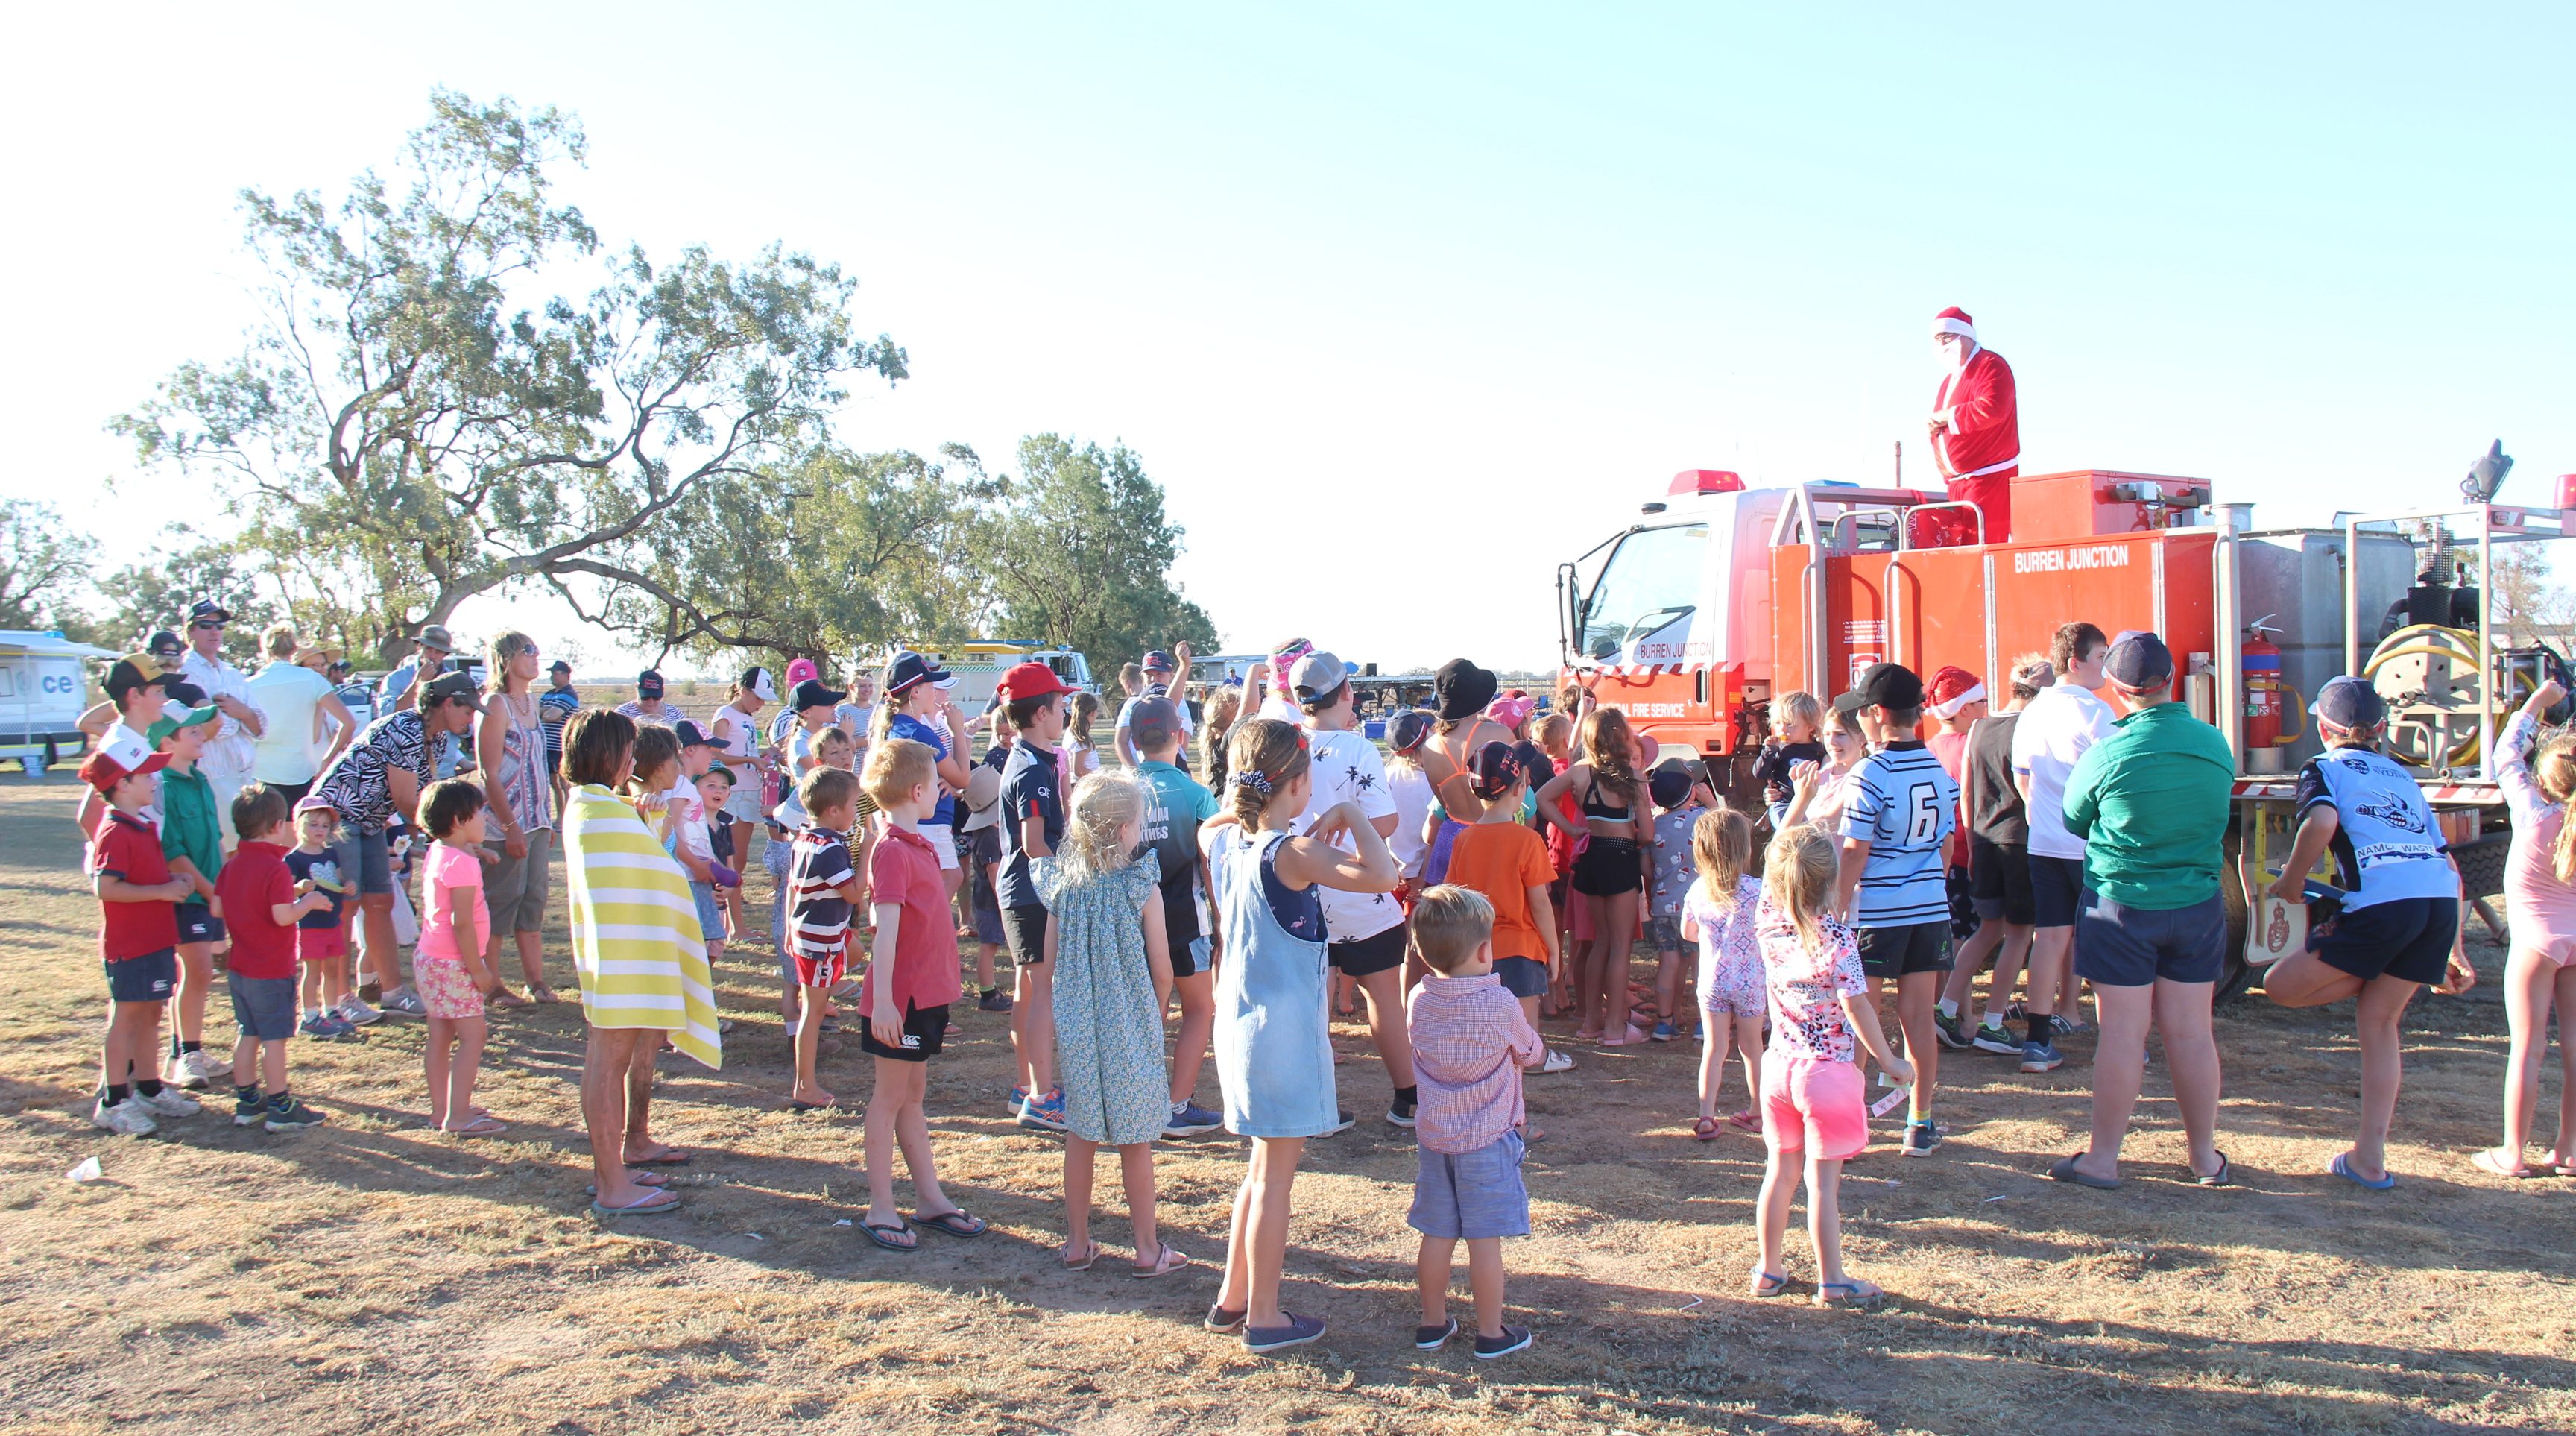 A highlight of the day was Santa Claus arriving in Burren Junction. The big man in red arrived on board the RFS fire truck driven by RFS member Christian Powell. Santa distributed lollies to the children with the help of Senior Constable Paul Matts.